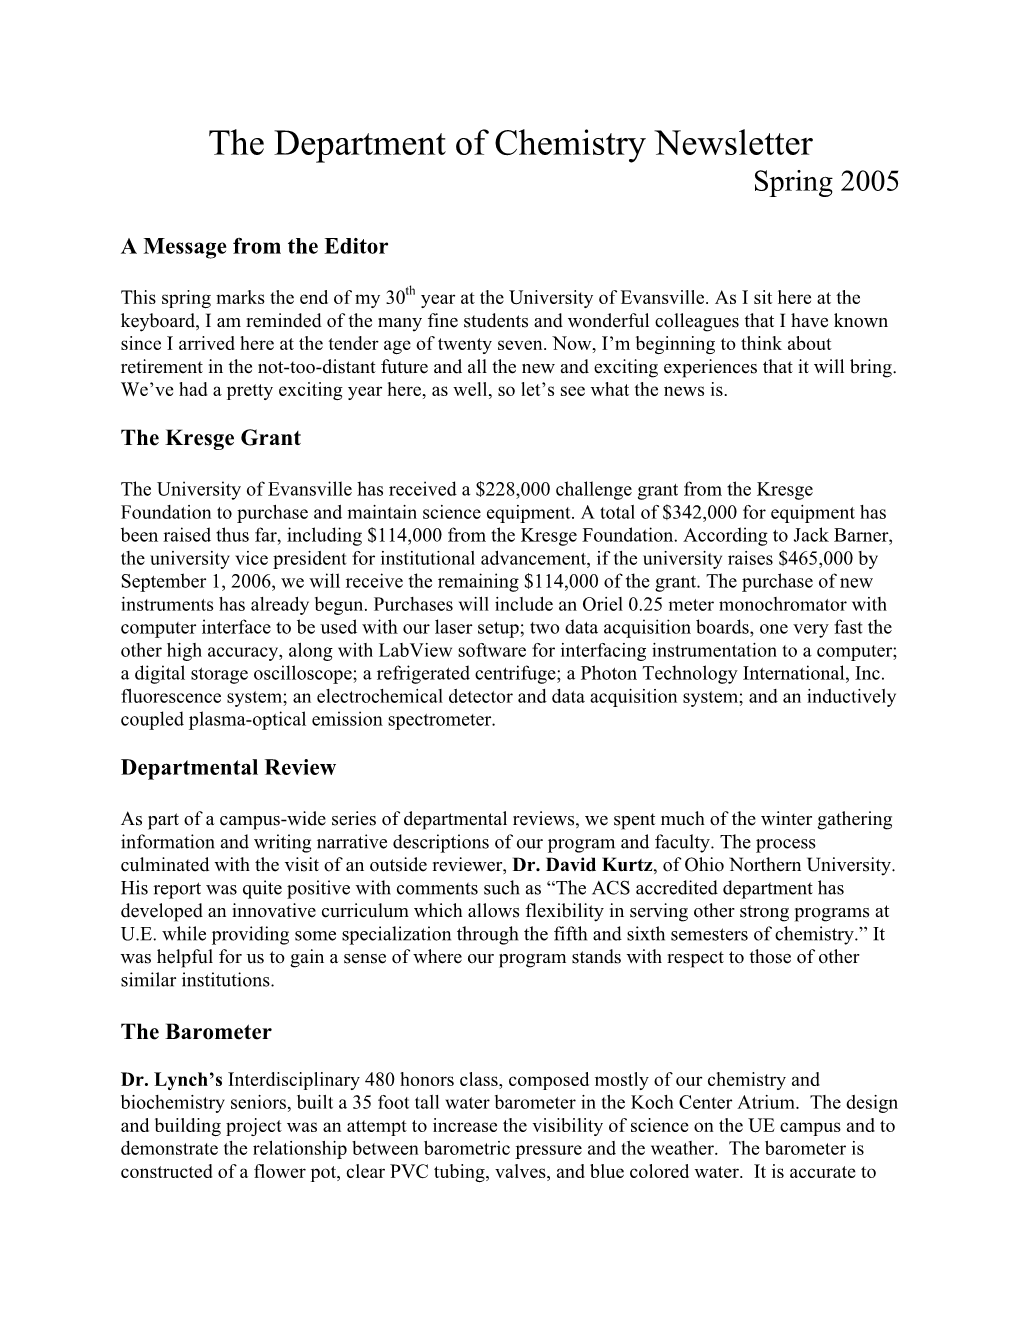 The Department of Chemistry Newsletter Spring 2005